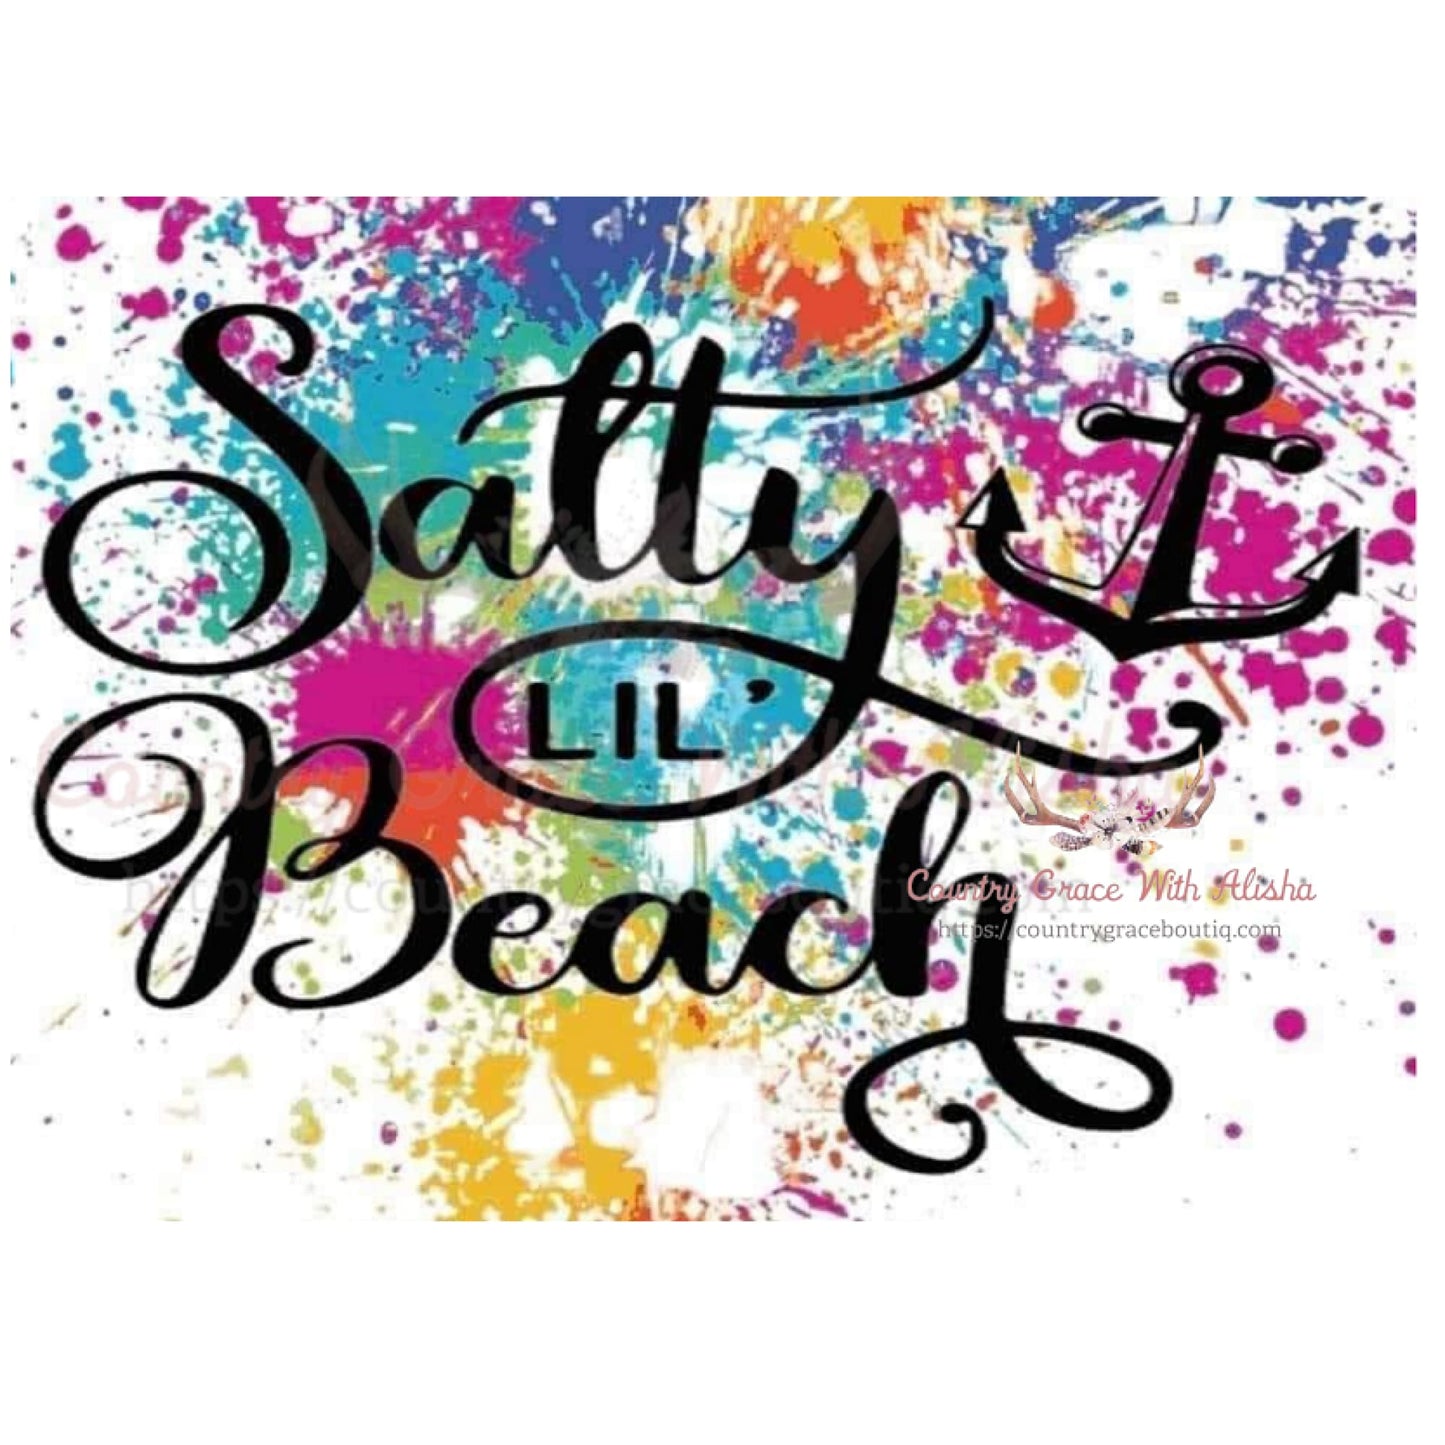 Salty Lil Beach Sublimation Transfer - Sub $1.50 Country 